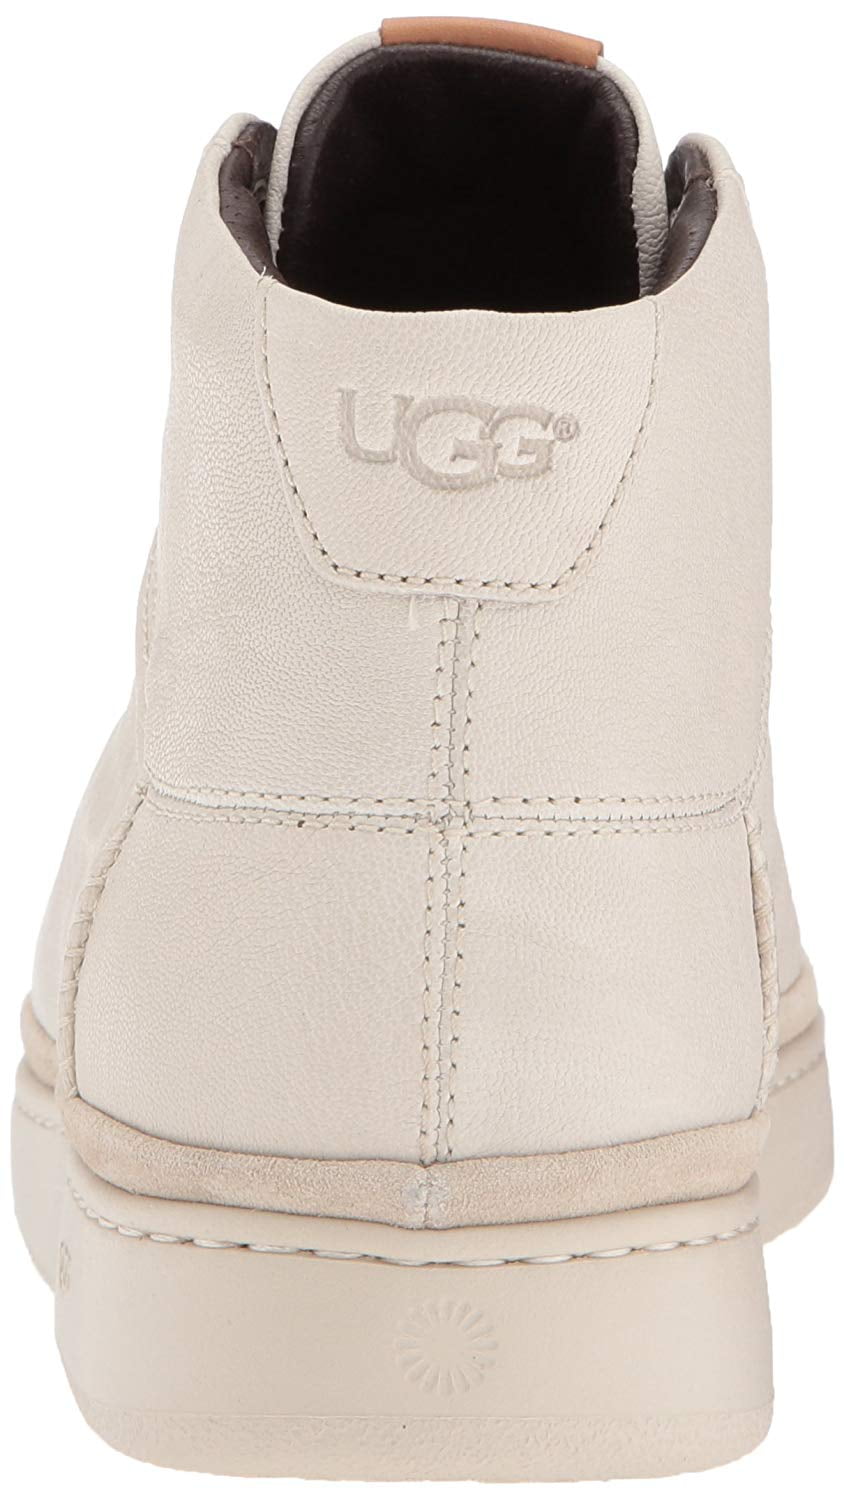 ugg men's cali lace high leather sneaker